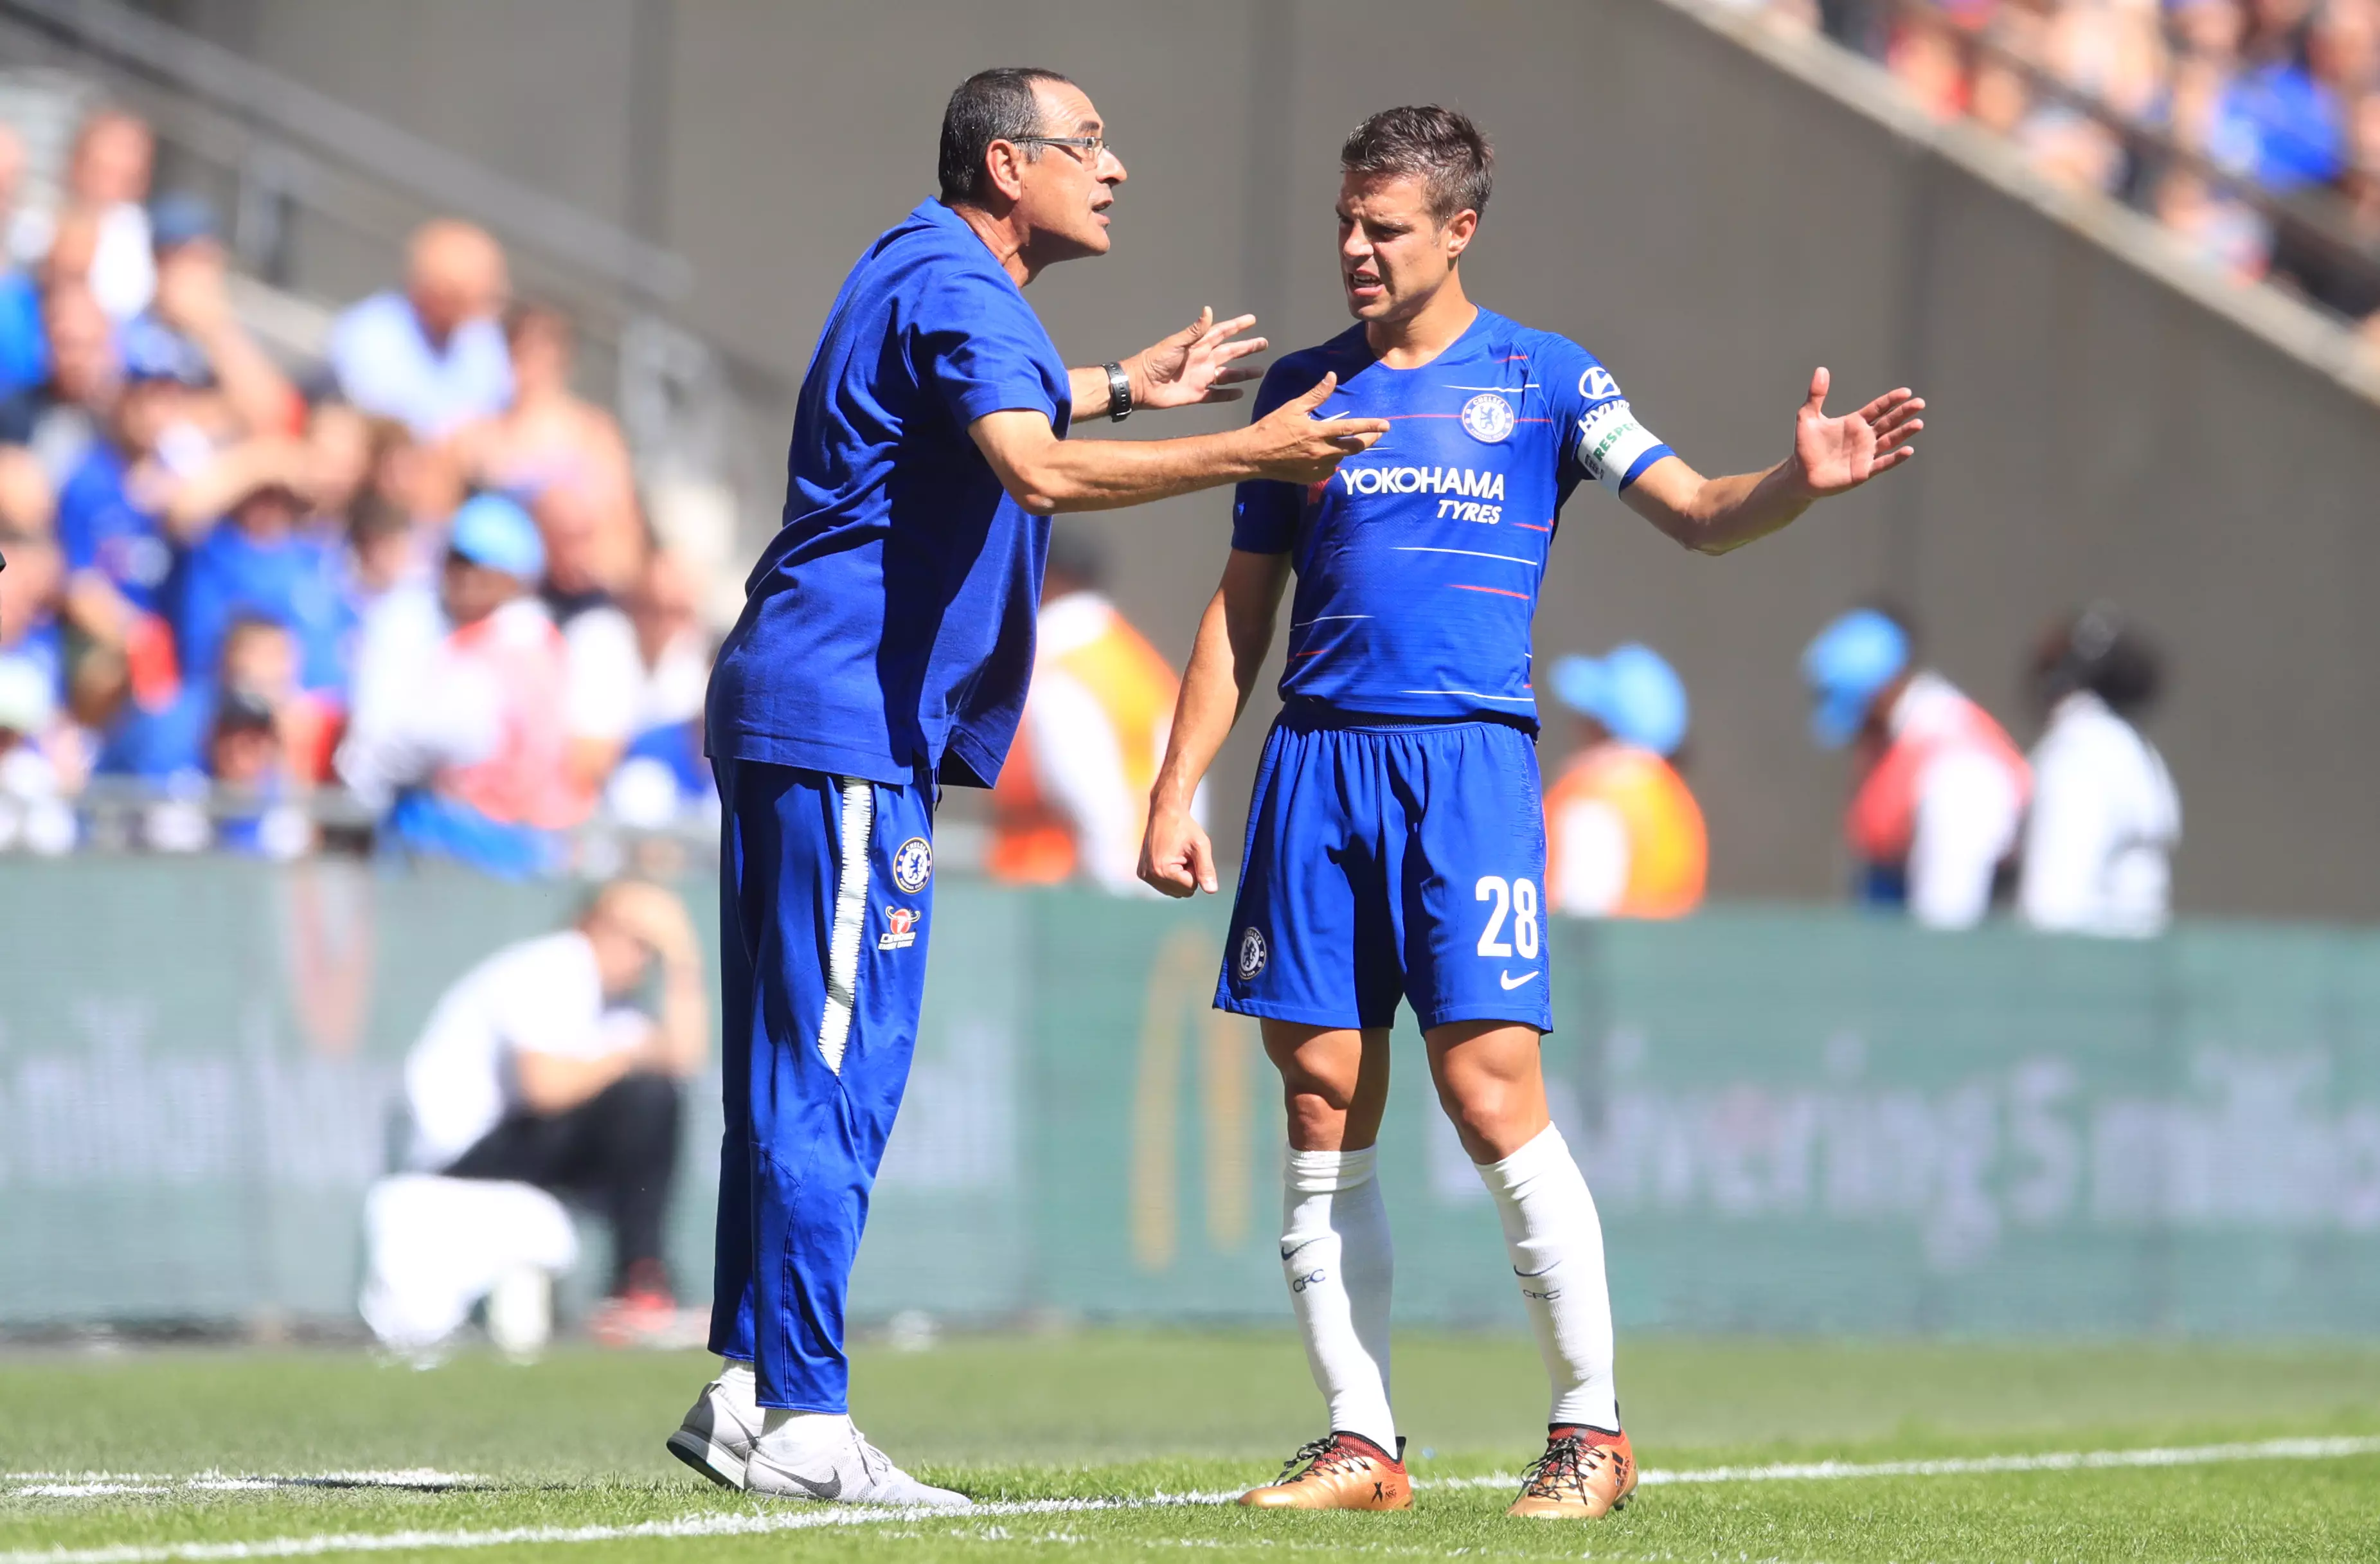 Sarri's welcome to England was a loss to City in Wembley. Image: PA Images